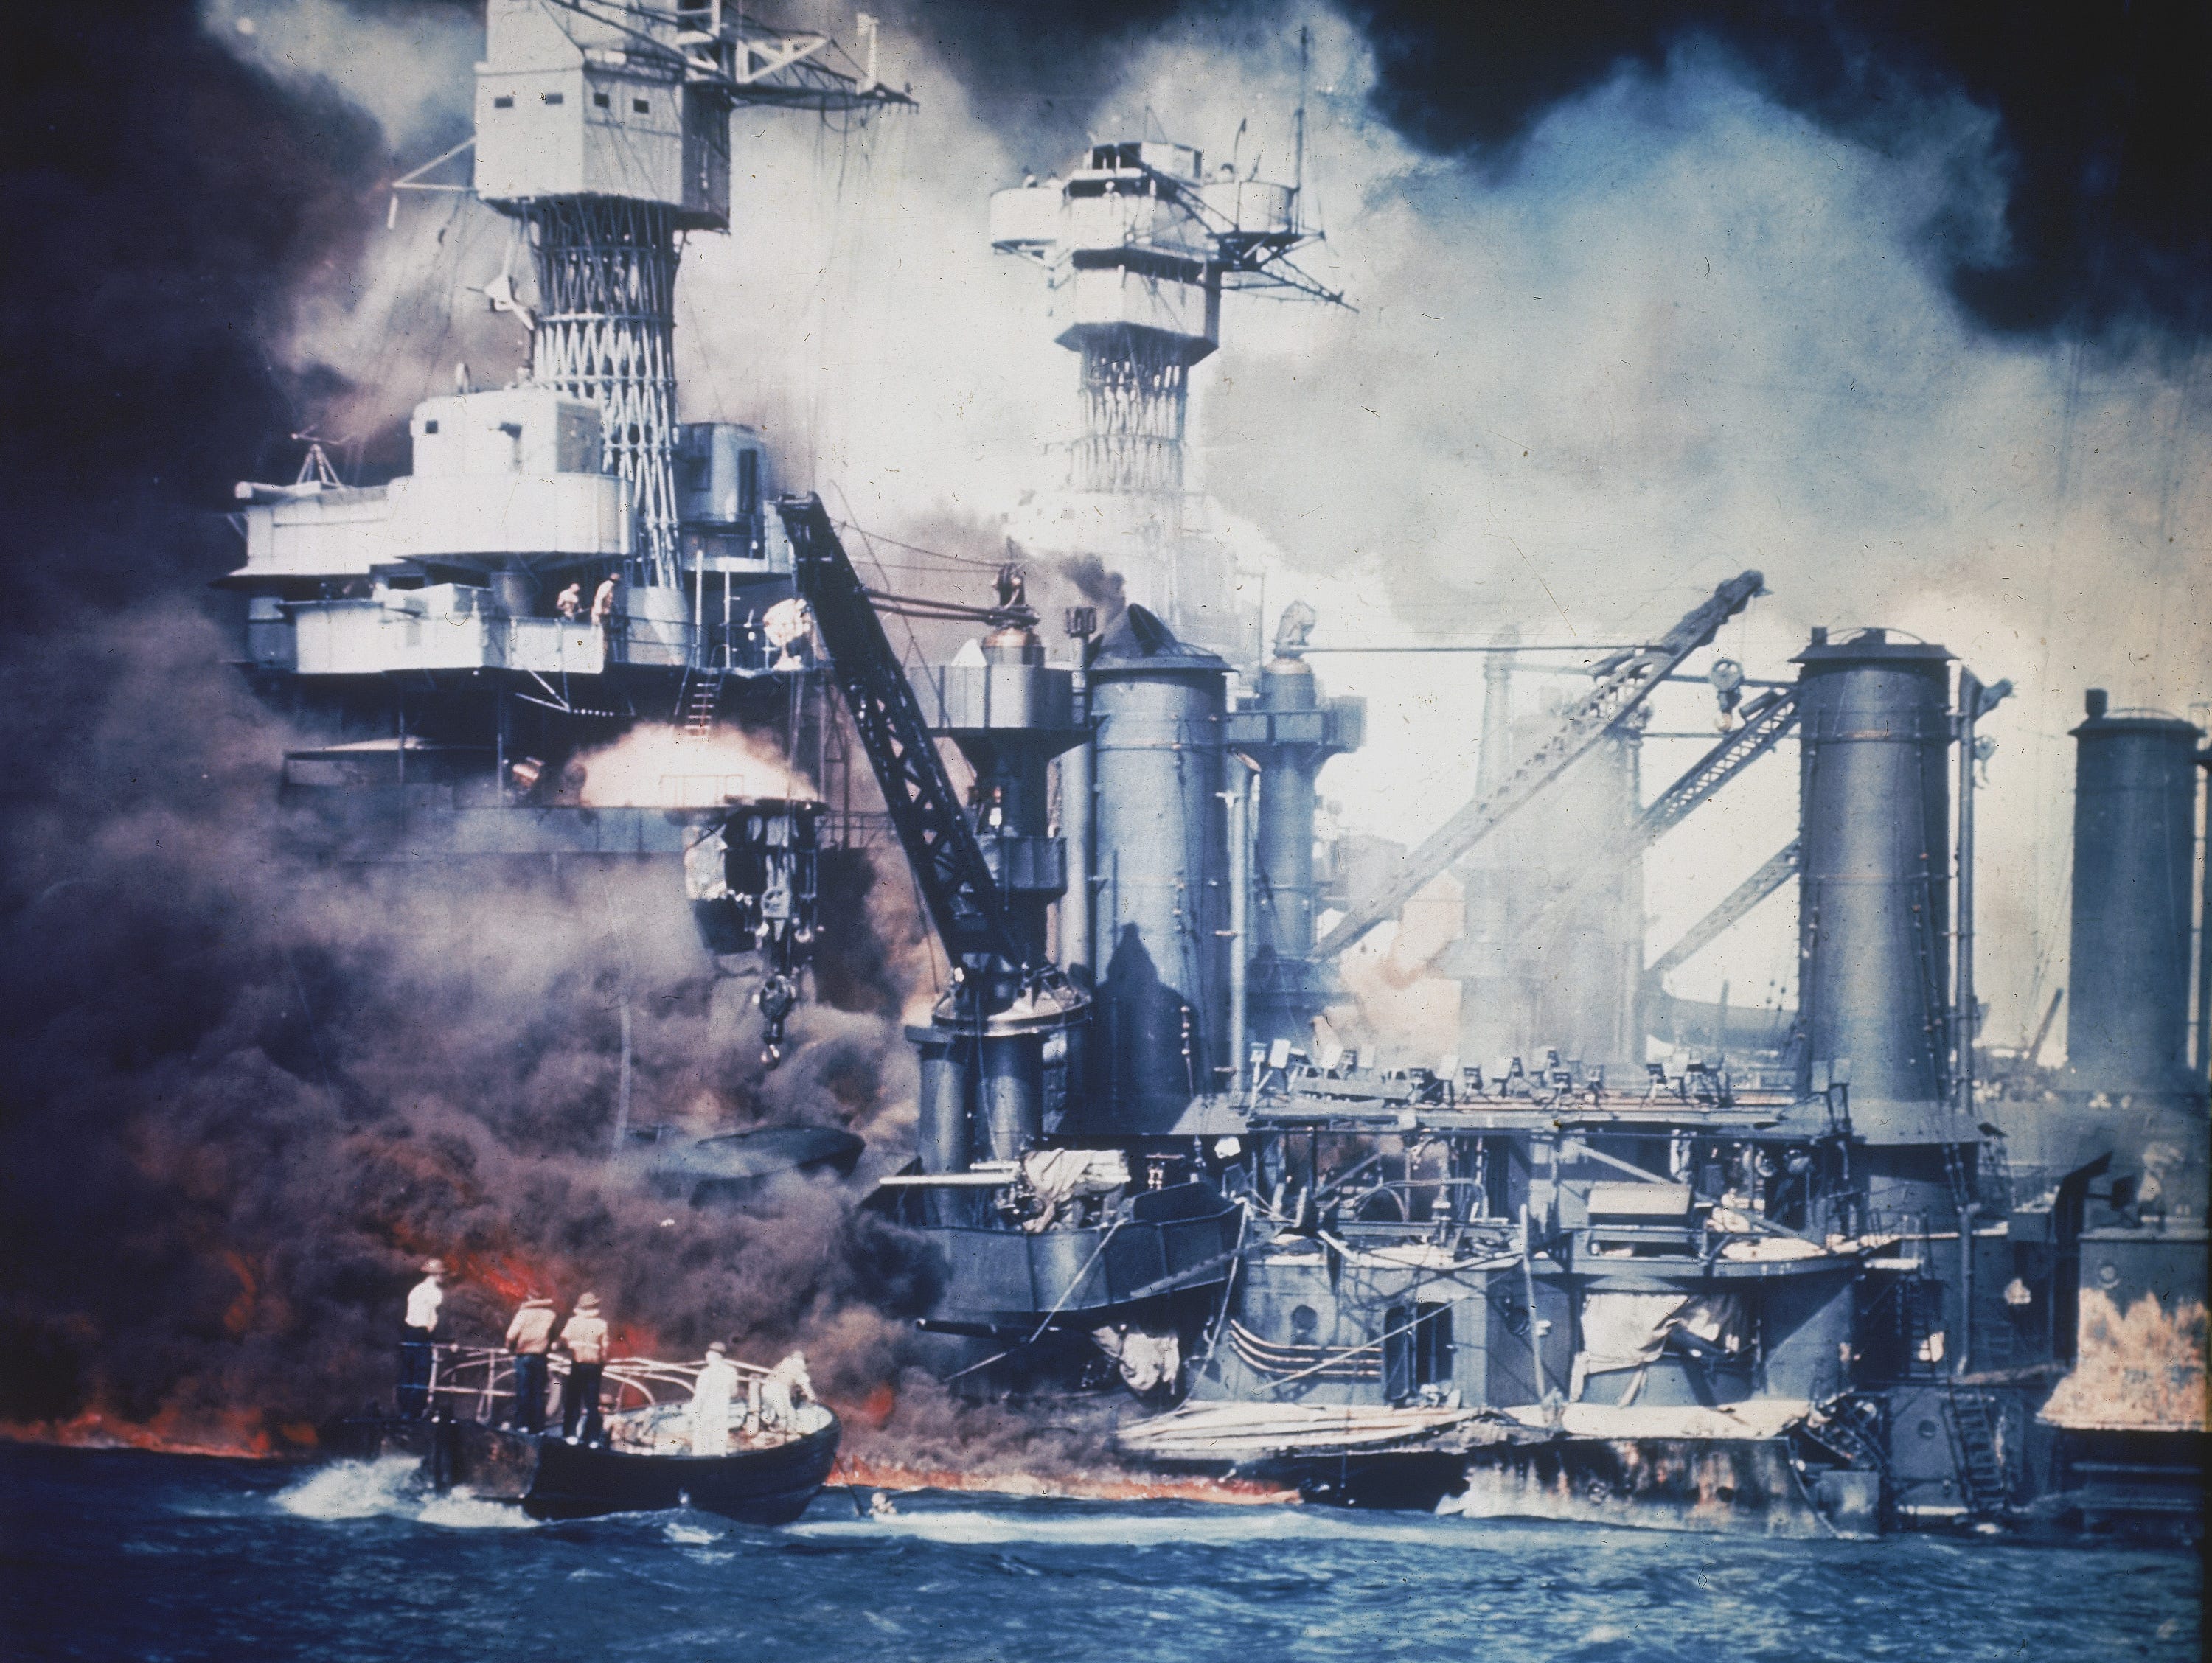 A small boat rescues a USS West Virginia crew members from the water after the Japanese bombing of Pearl Harbor. Two men can be seen on the superstructure, upper center. The mast of the USS Tennessee is beyond the burning West Virginia.